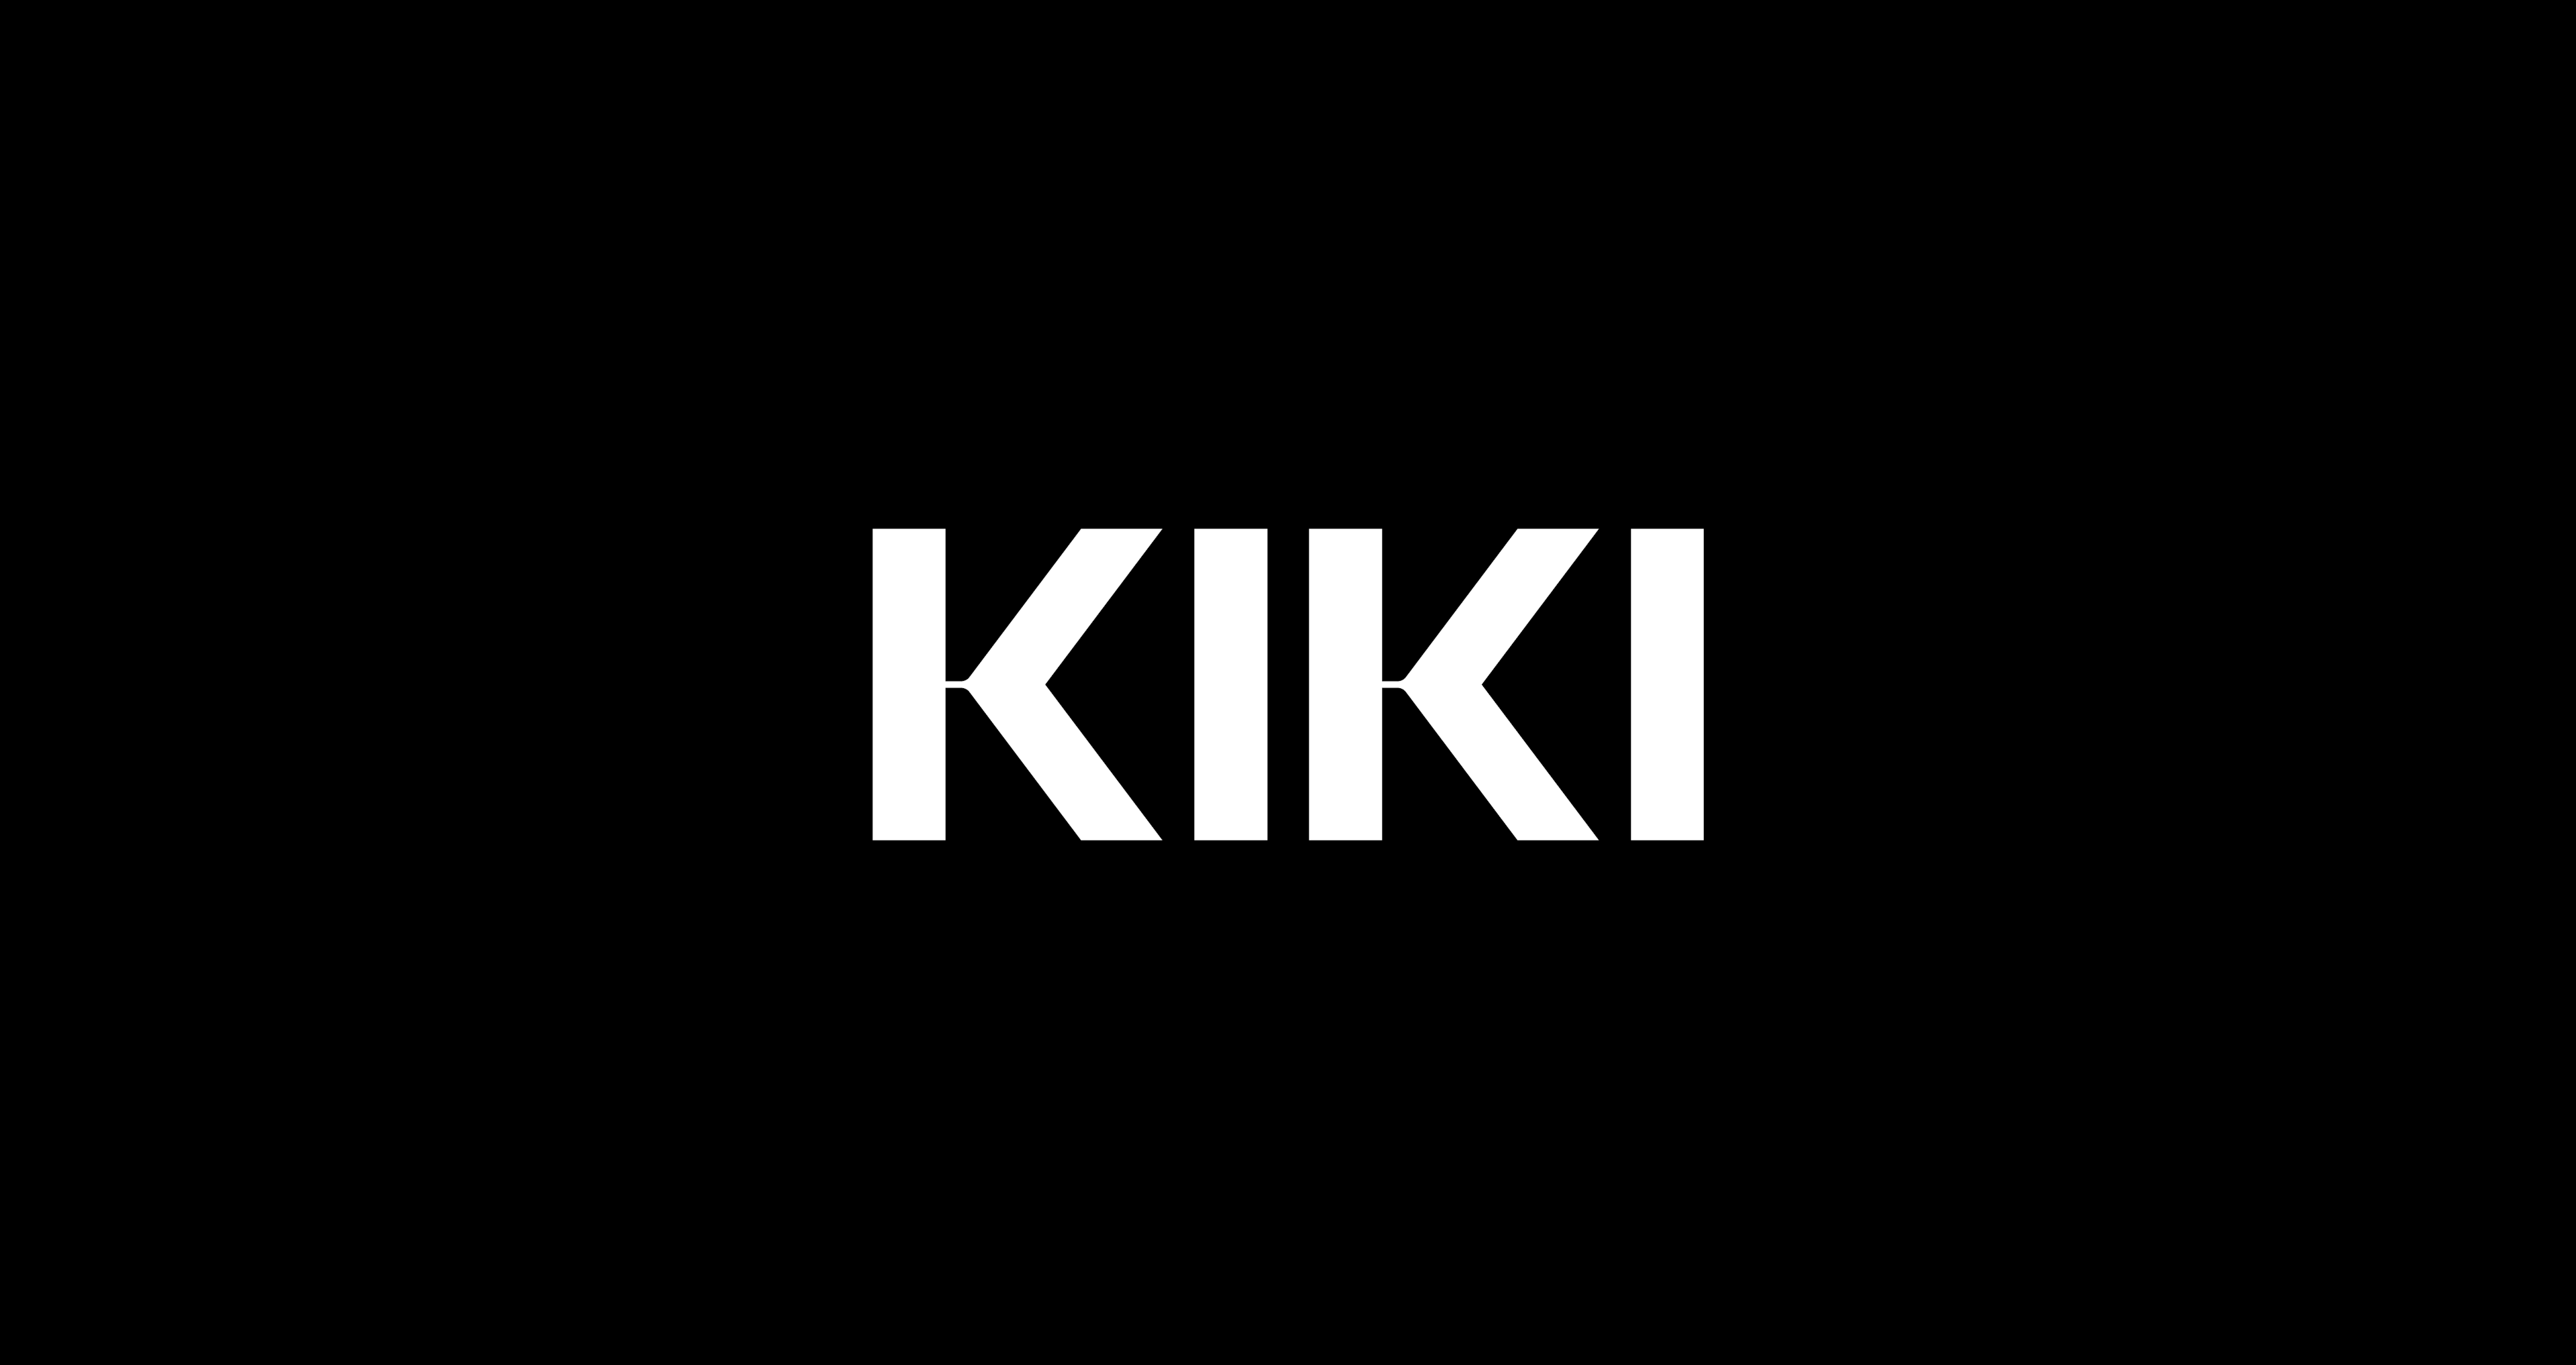 KIKI uses revenue sharing to promote their Onchain Summer Mint title